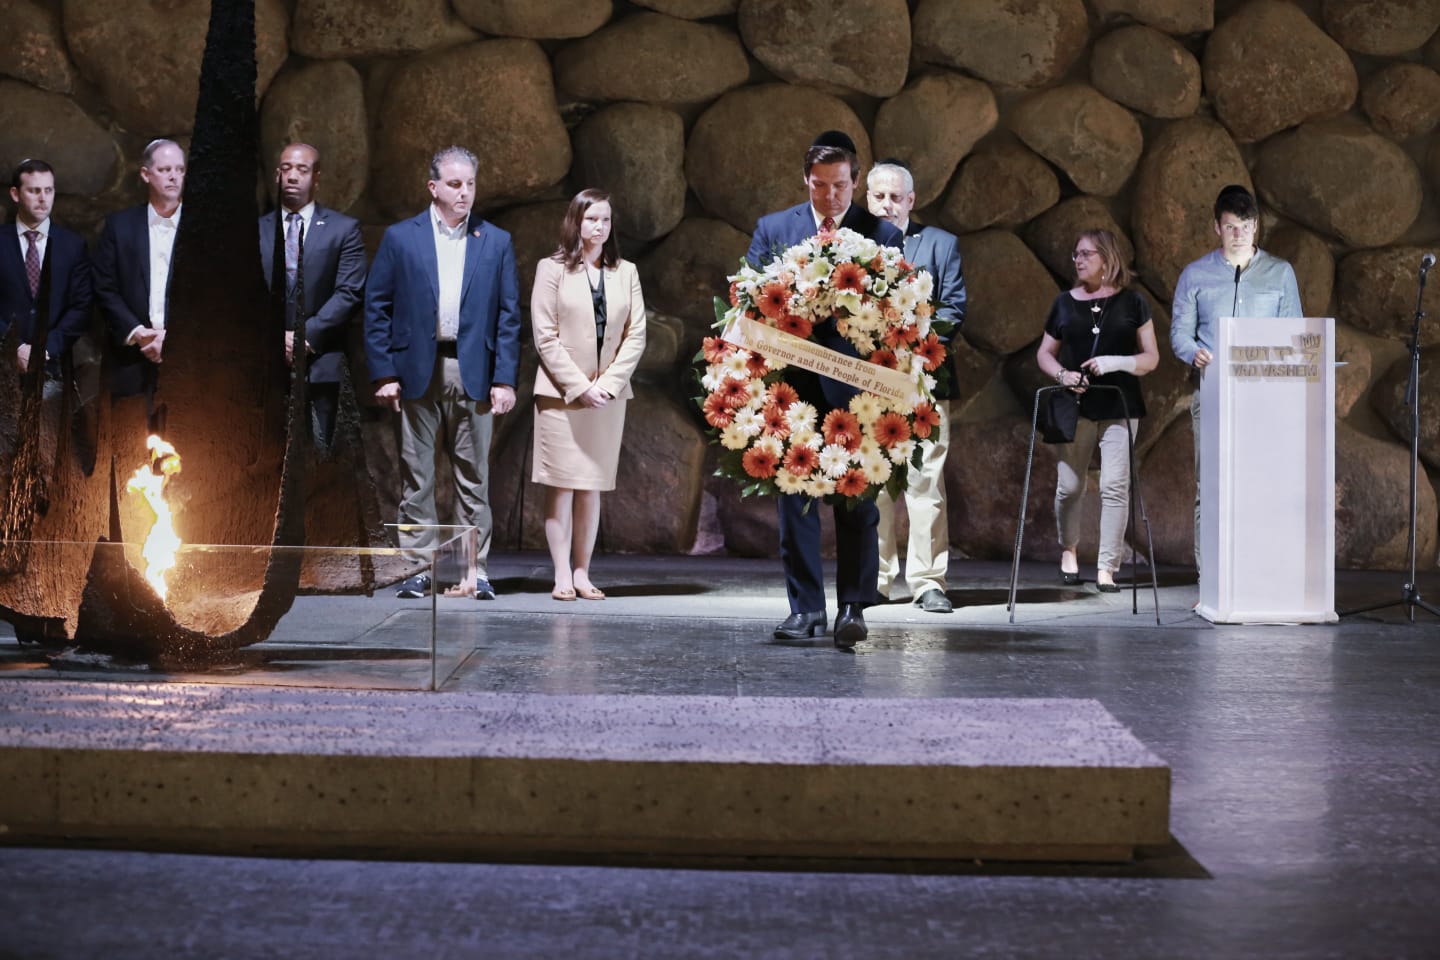   PHOTO RELEASE: Governor Ron DeSantis Participates in Wreath Laying Ceremony at Yad Vashem, Honors the Memory of Jews Who Perished in the Holocaust